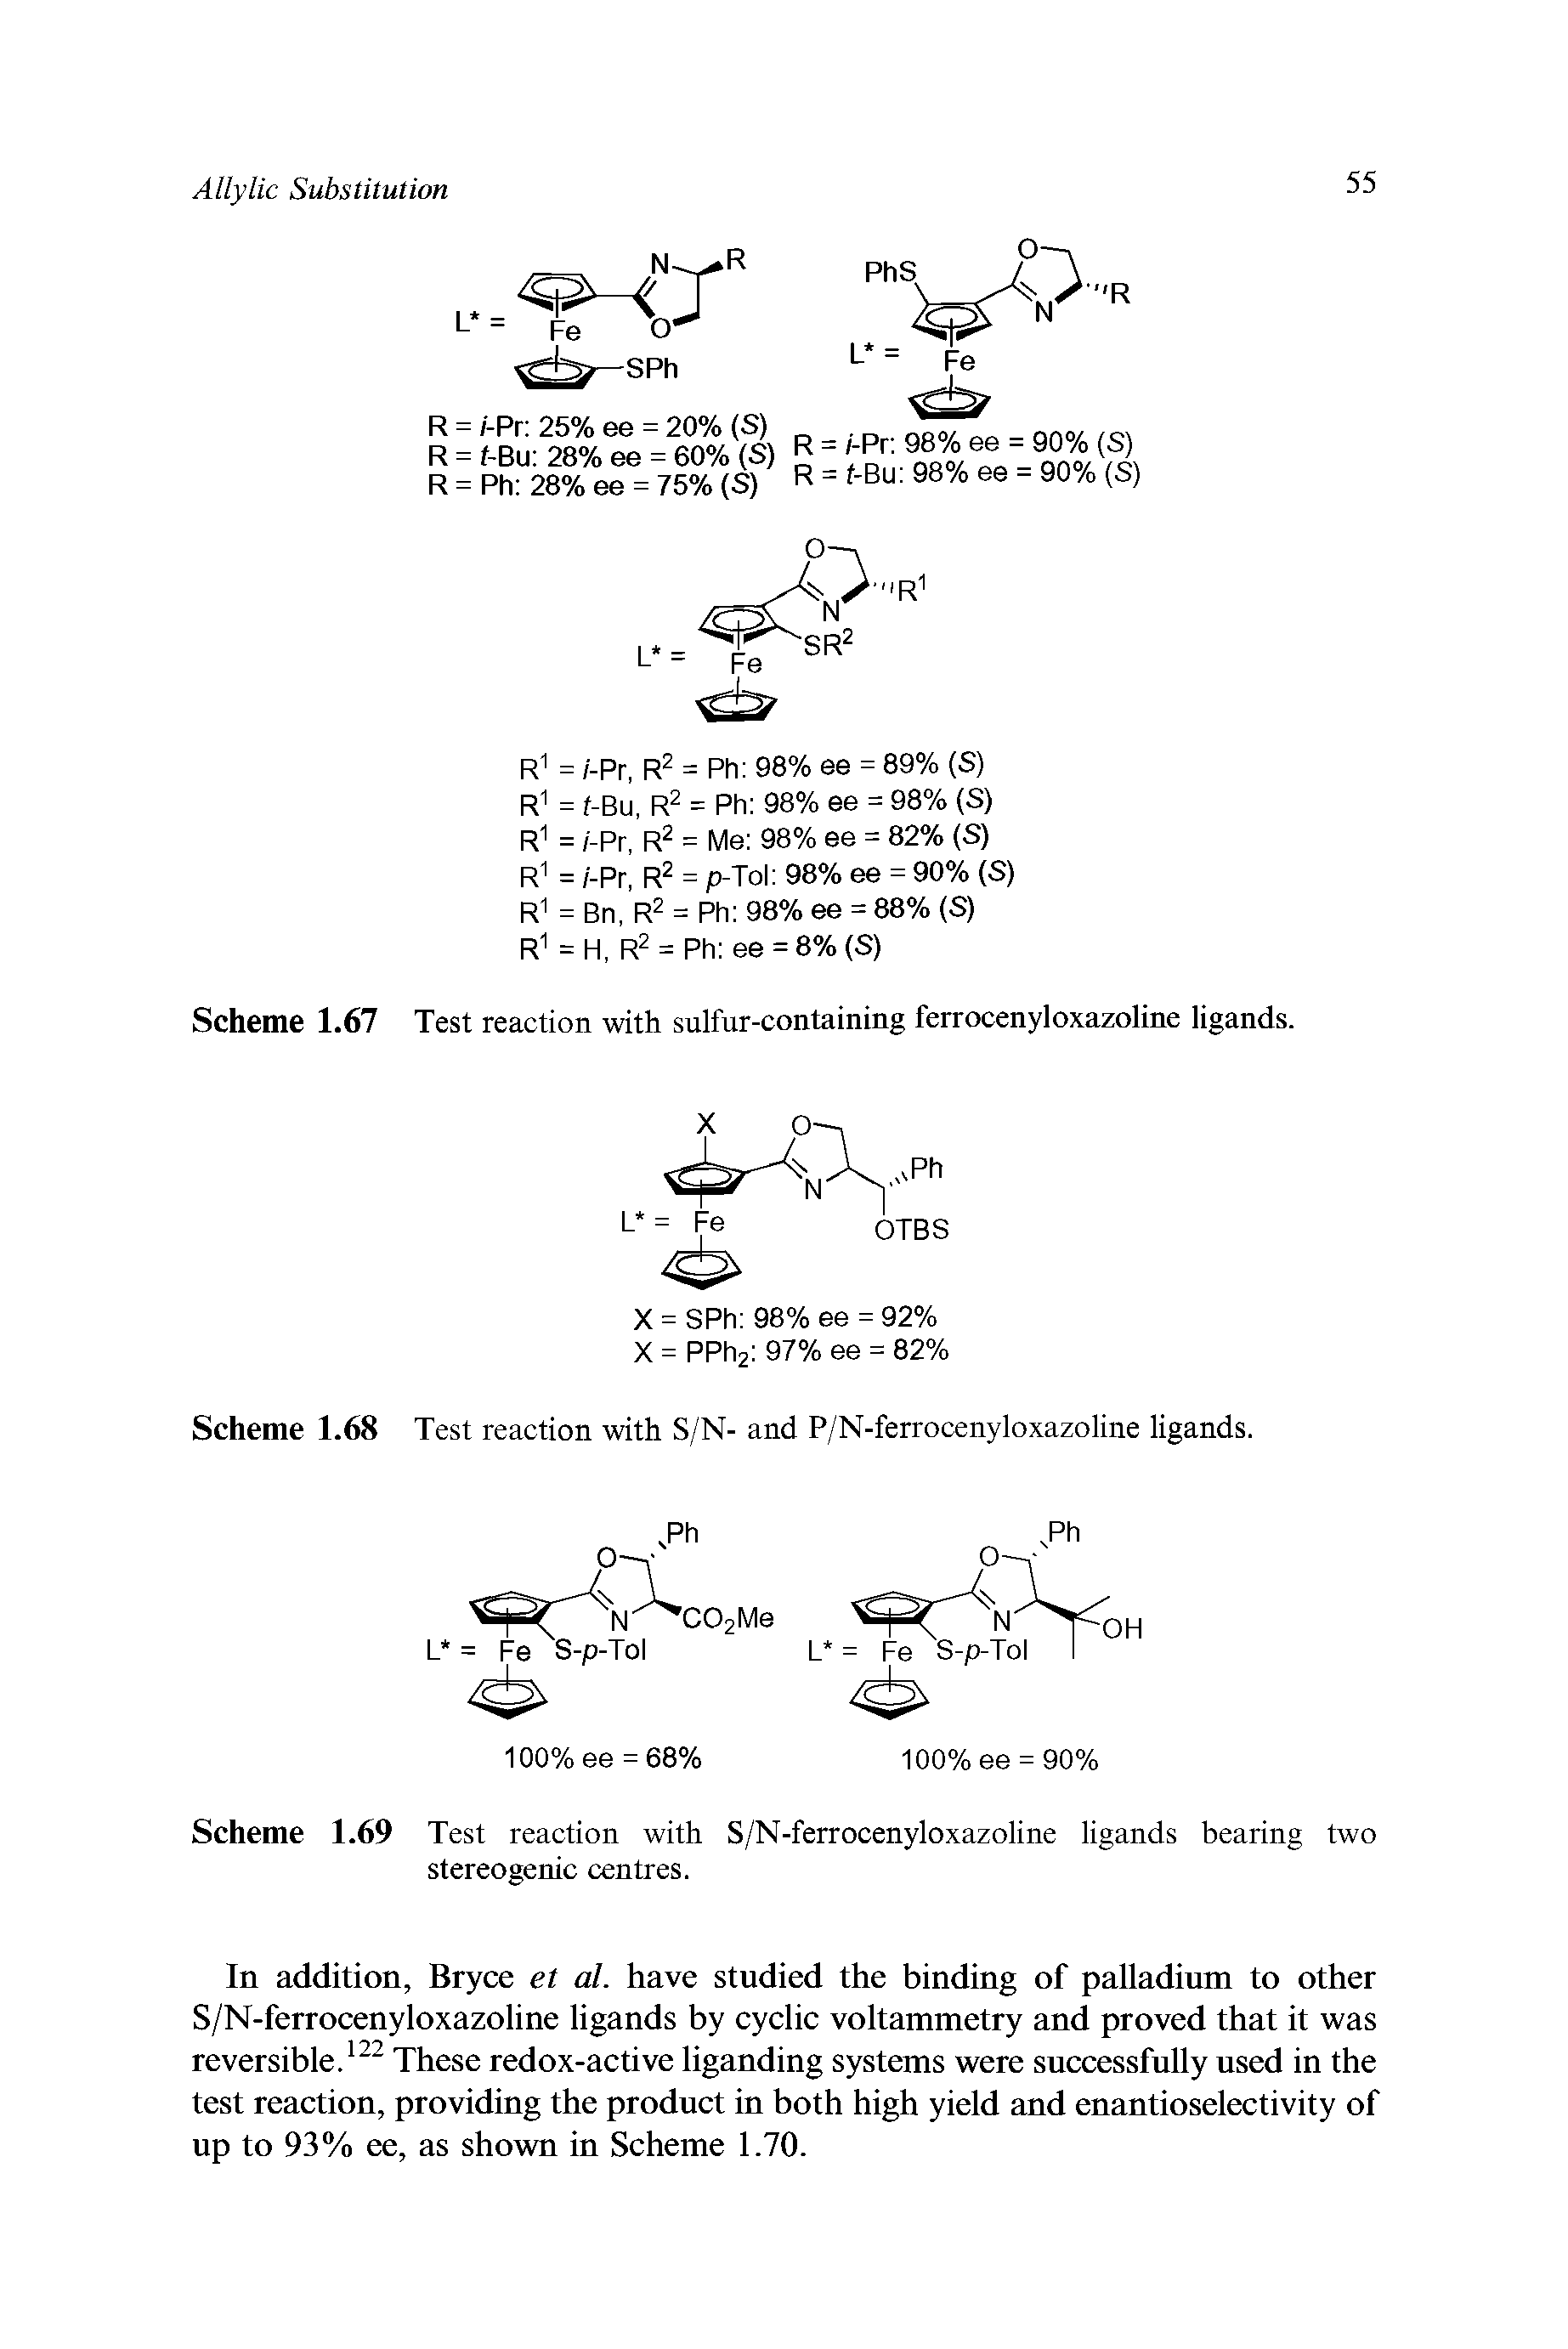 Scheme 1.69 Test reaction with S/N-ferrocenyloxazoline ligands bearing two stereogenic centres.